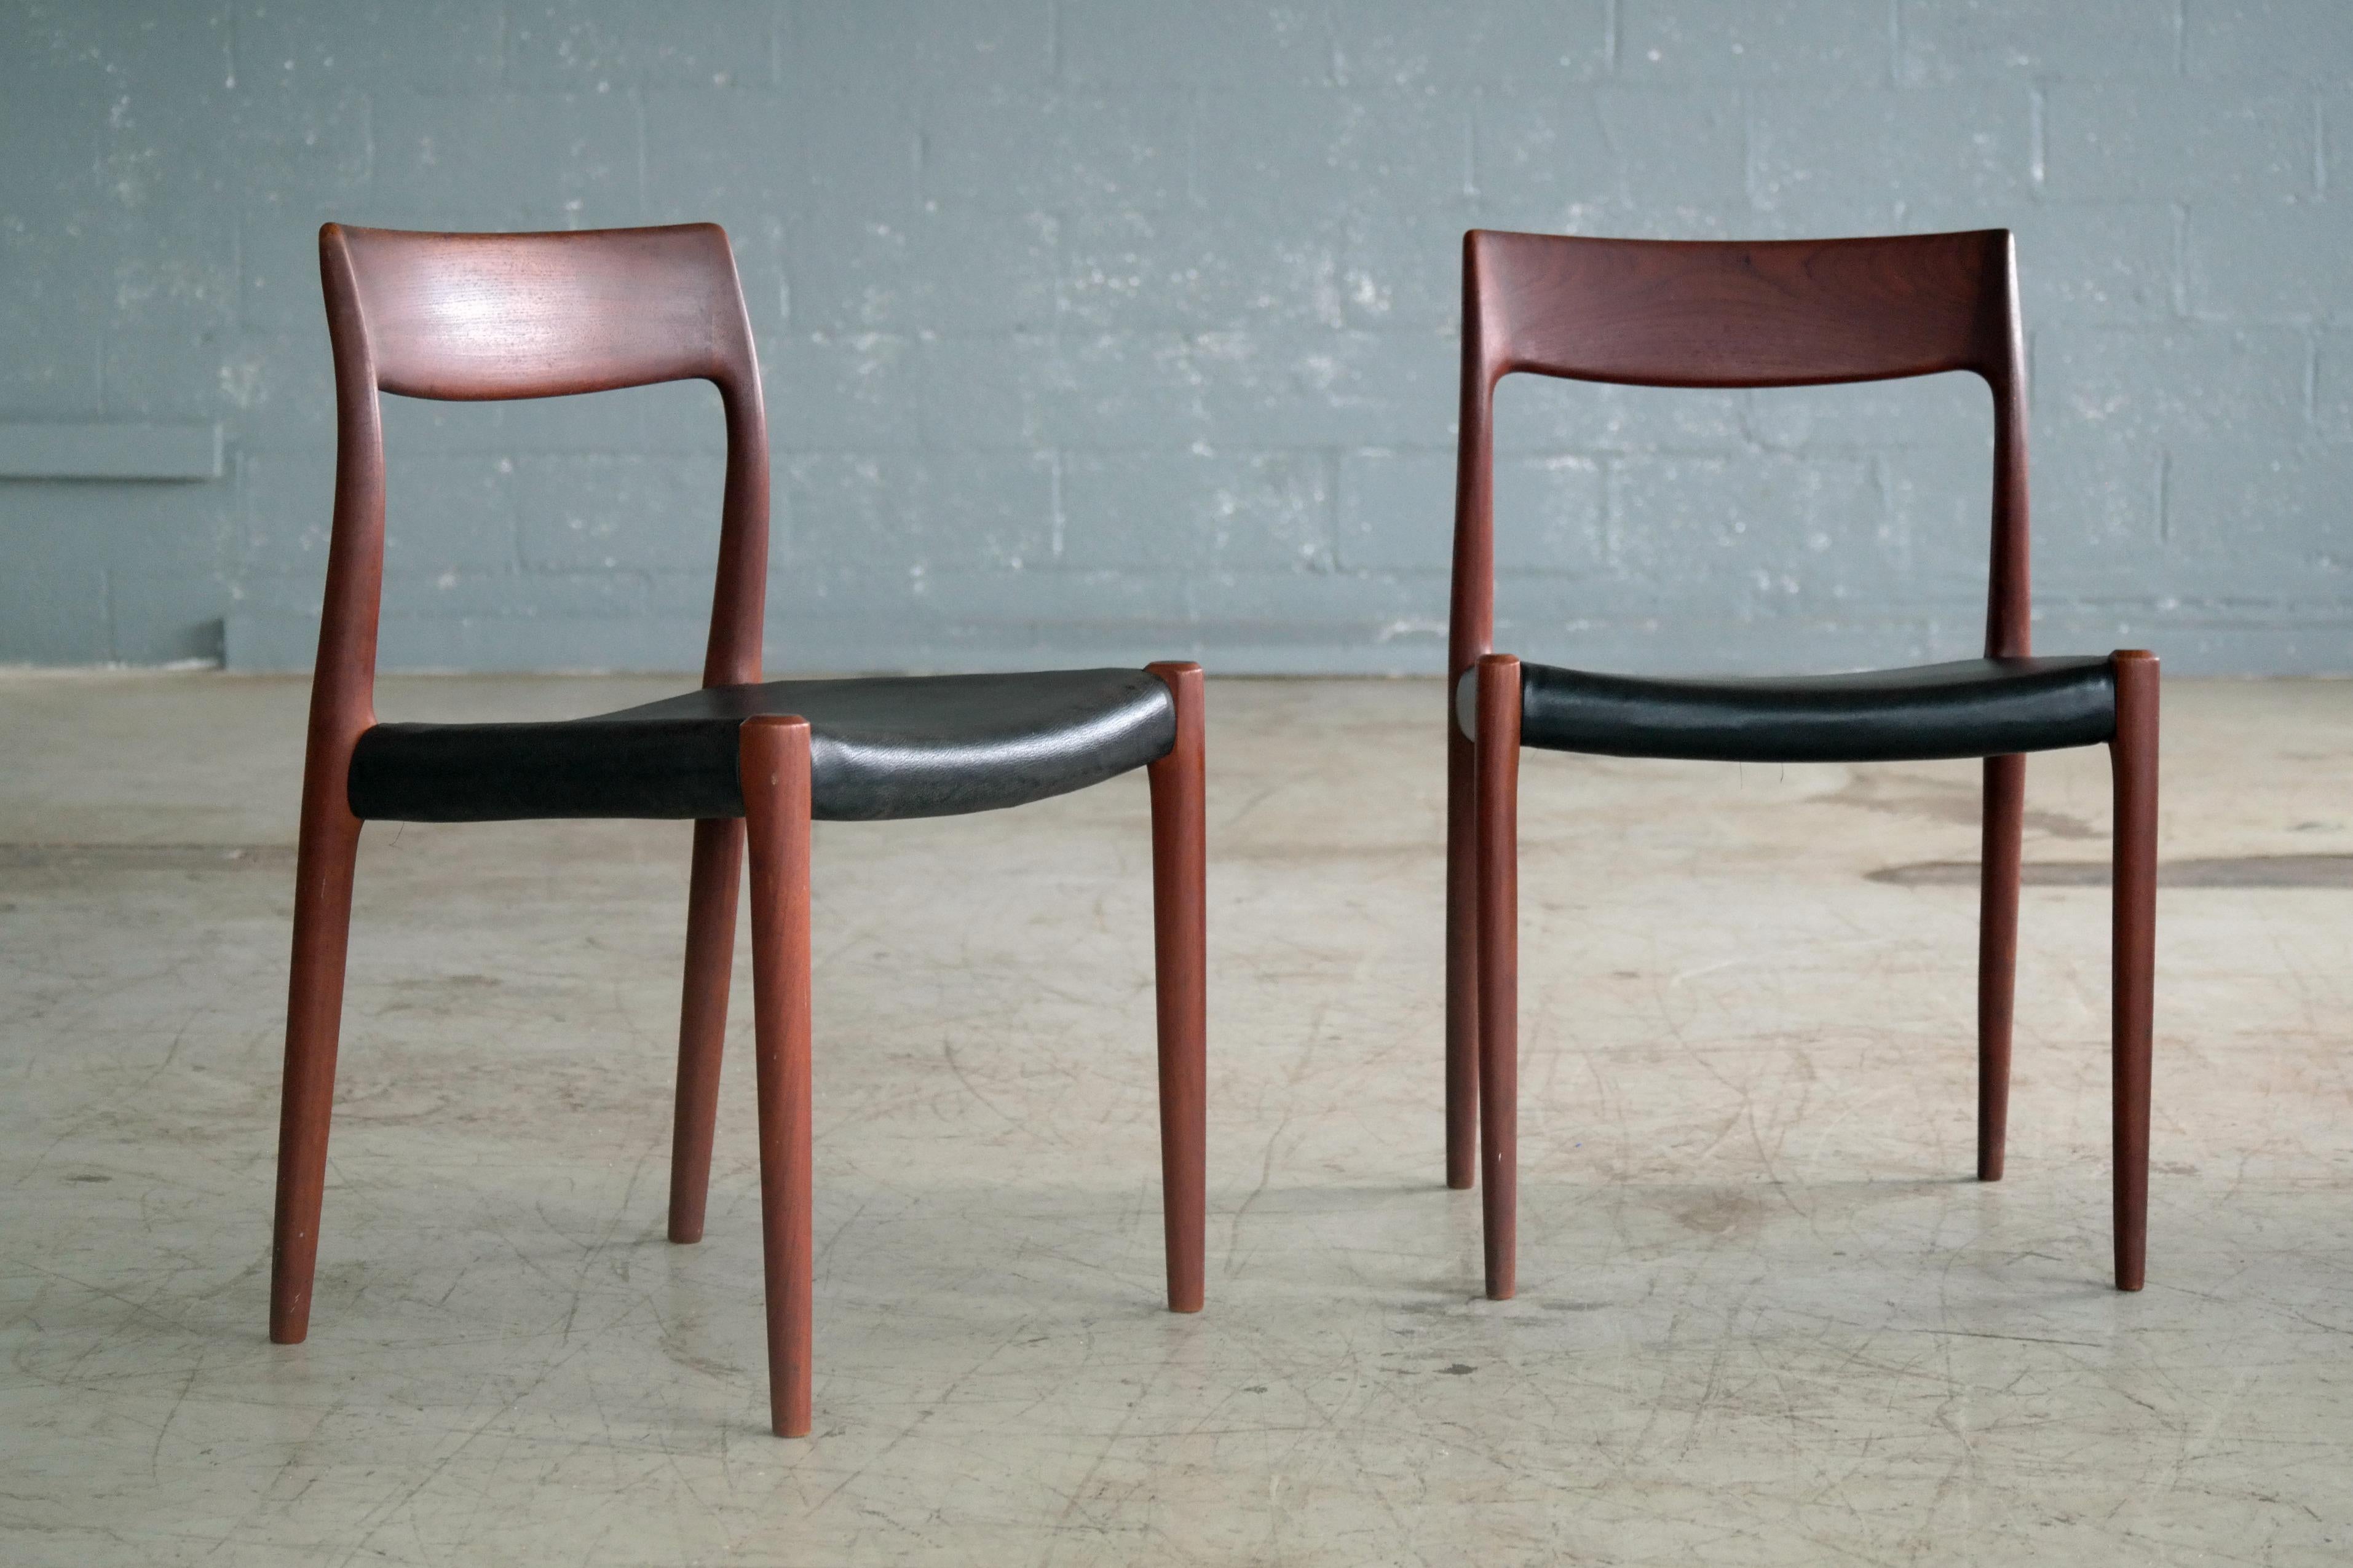 Fantastic pair of dining or side chairs in dark teak with leather seats designed in the 1960s by Kai Kristiansen for K.S. Mobler of Denmark. The style of the Kai Kristiansen chairs is easily mistaken for N. O Moller and they are of a very